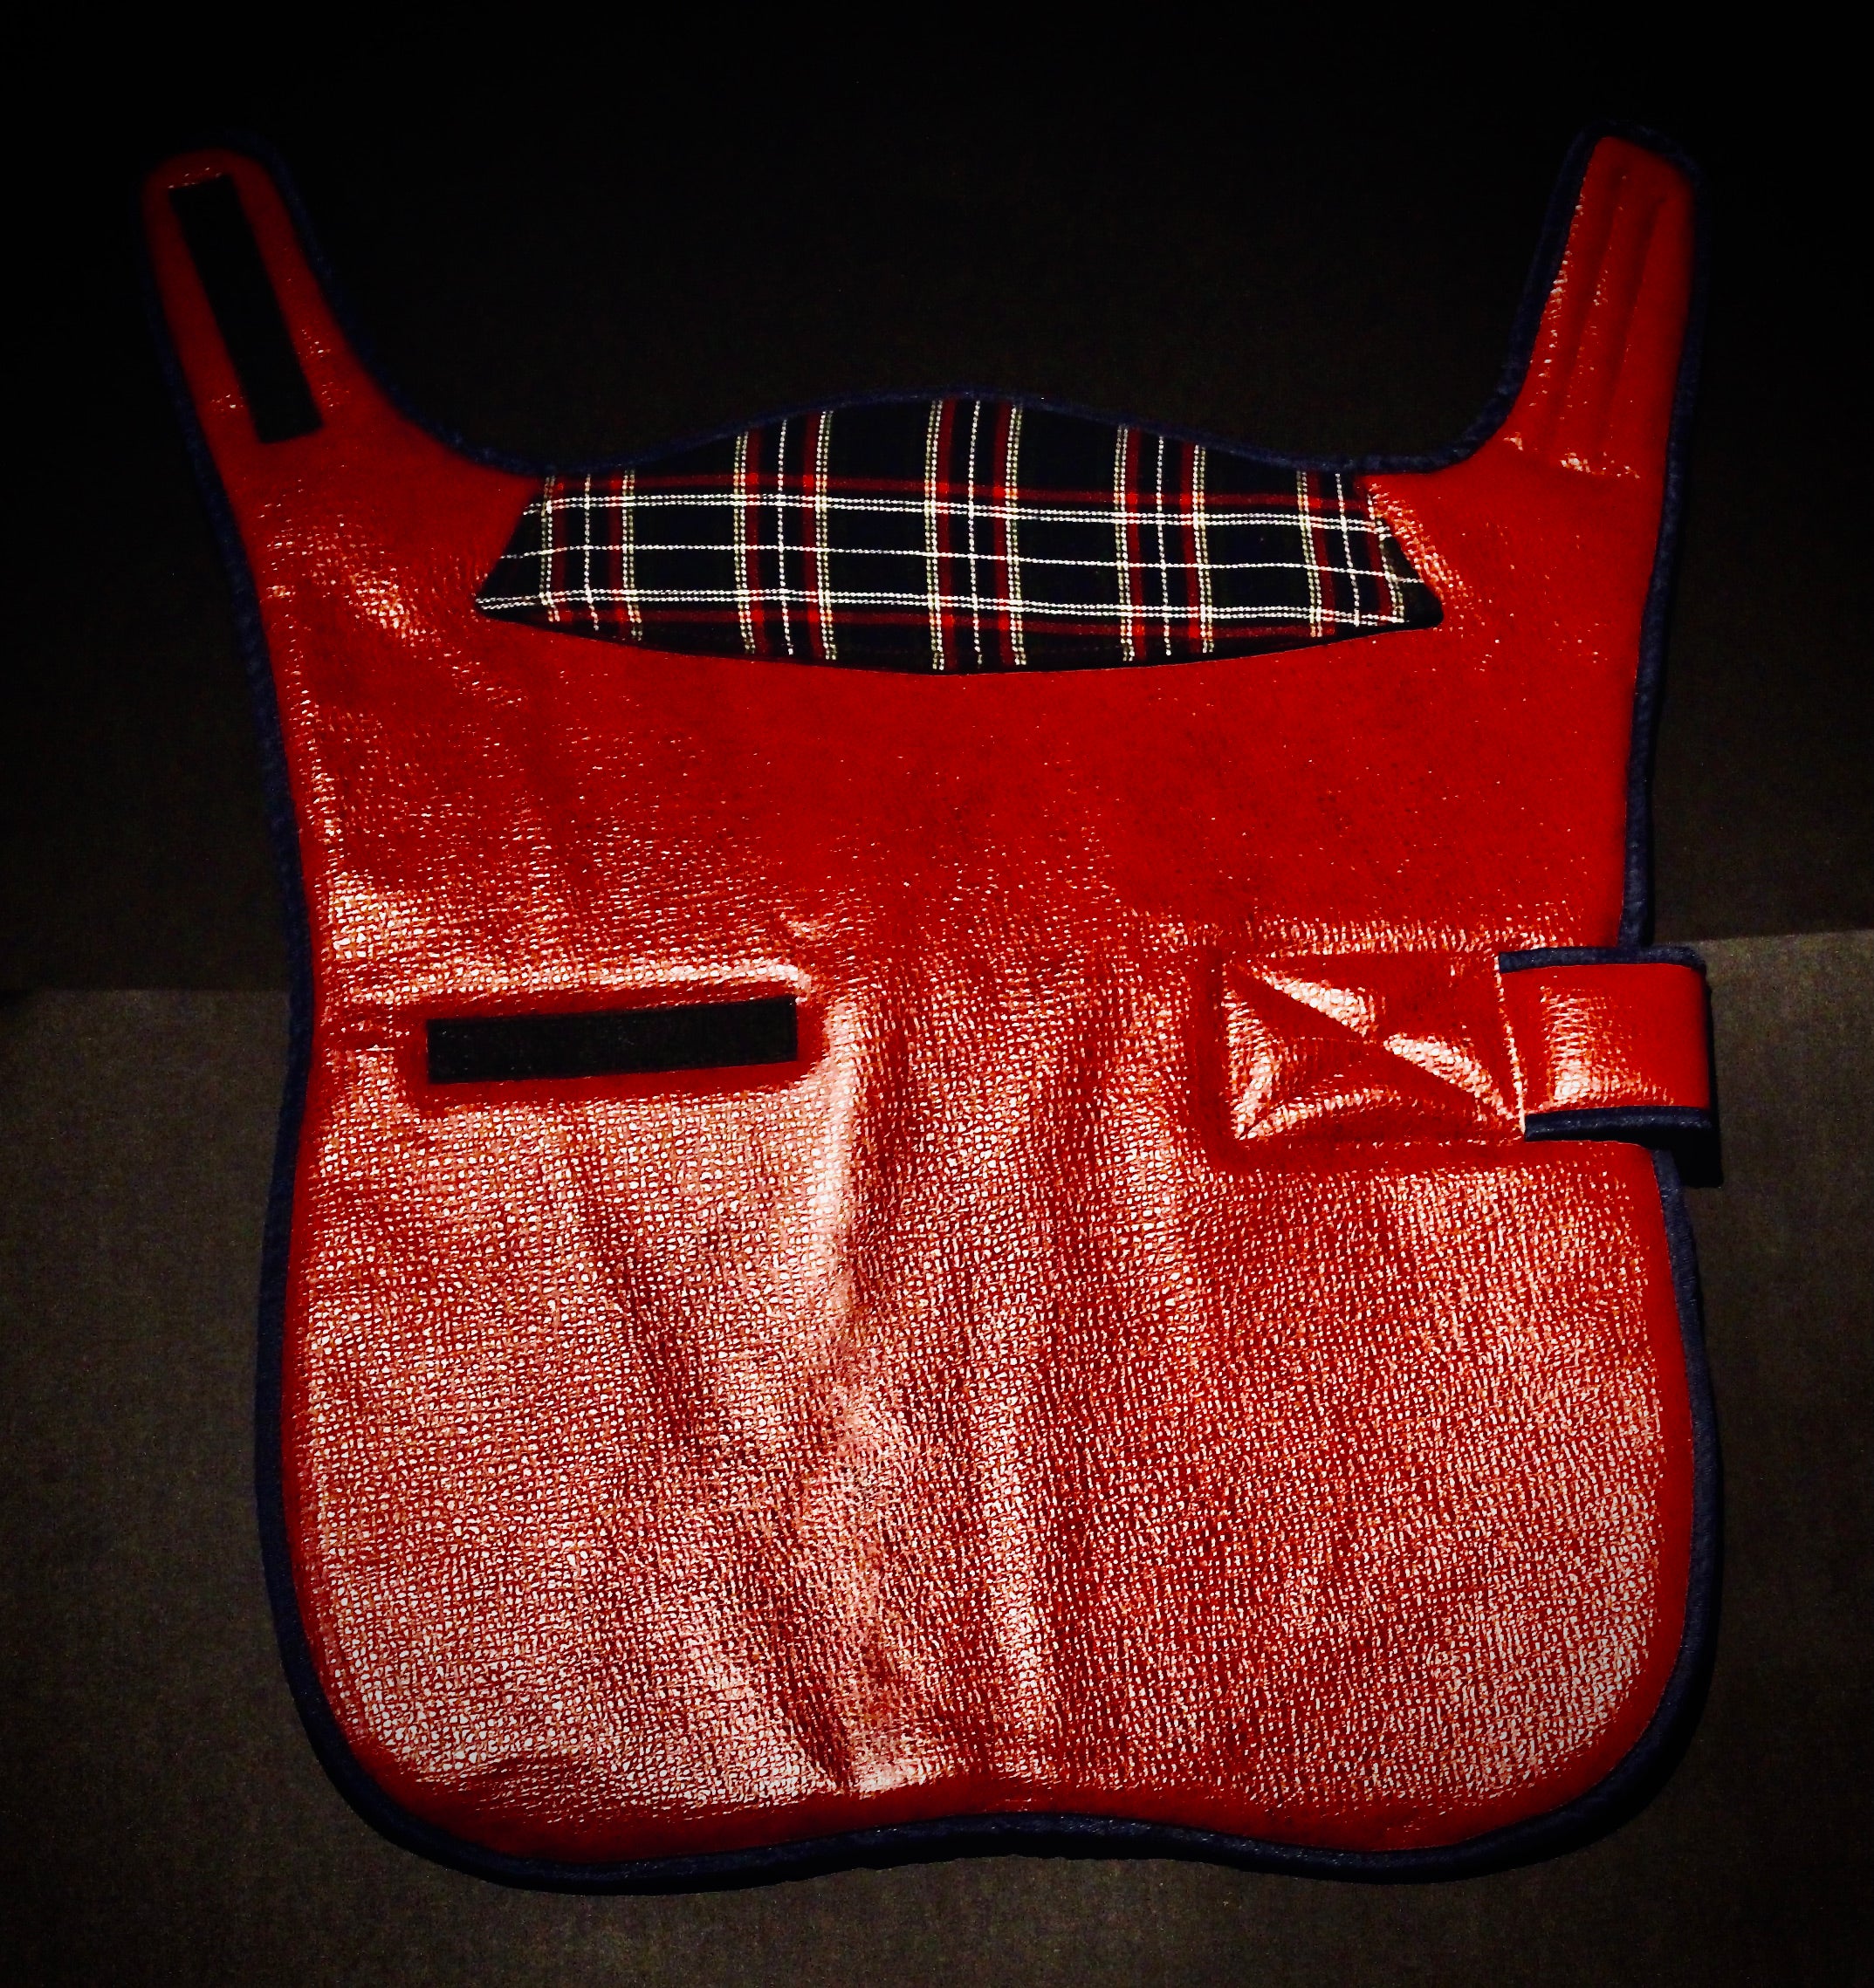 Pebbled/Distressed Red Leather over Tartan Jacket